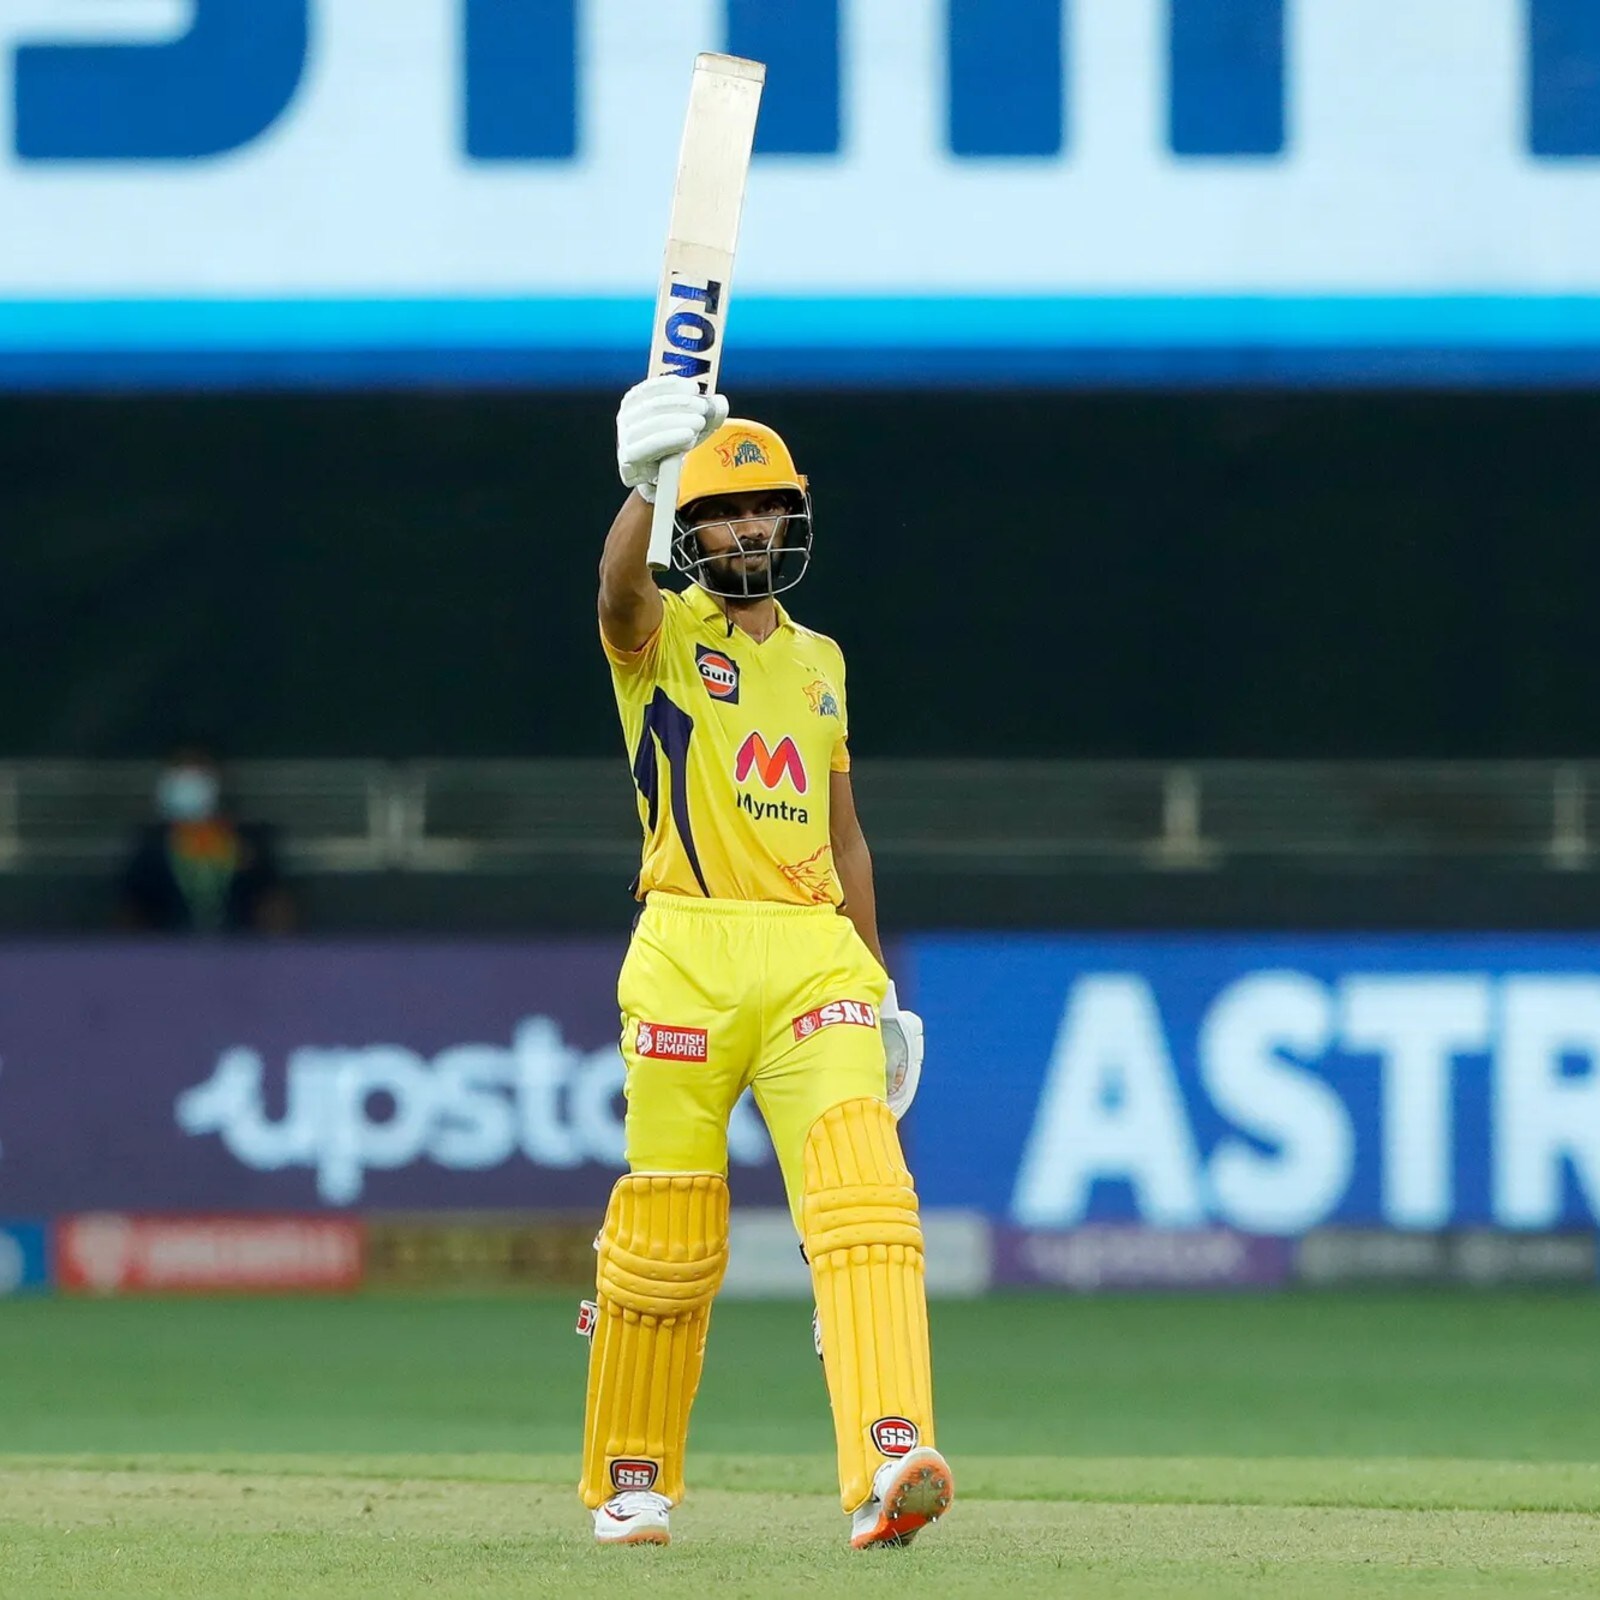 CSK vs KKR Live Streaming, IPL 2021 Match 38 When and Where to Watch Chennai Super Kings vs Kolkata Knight Riders Live Streaming Online